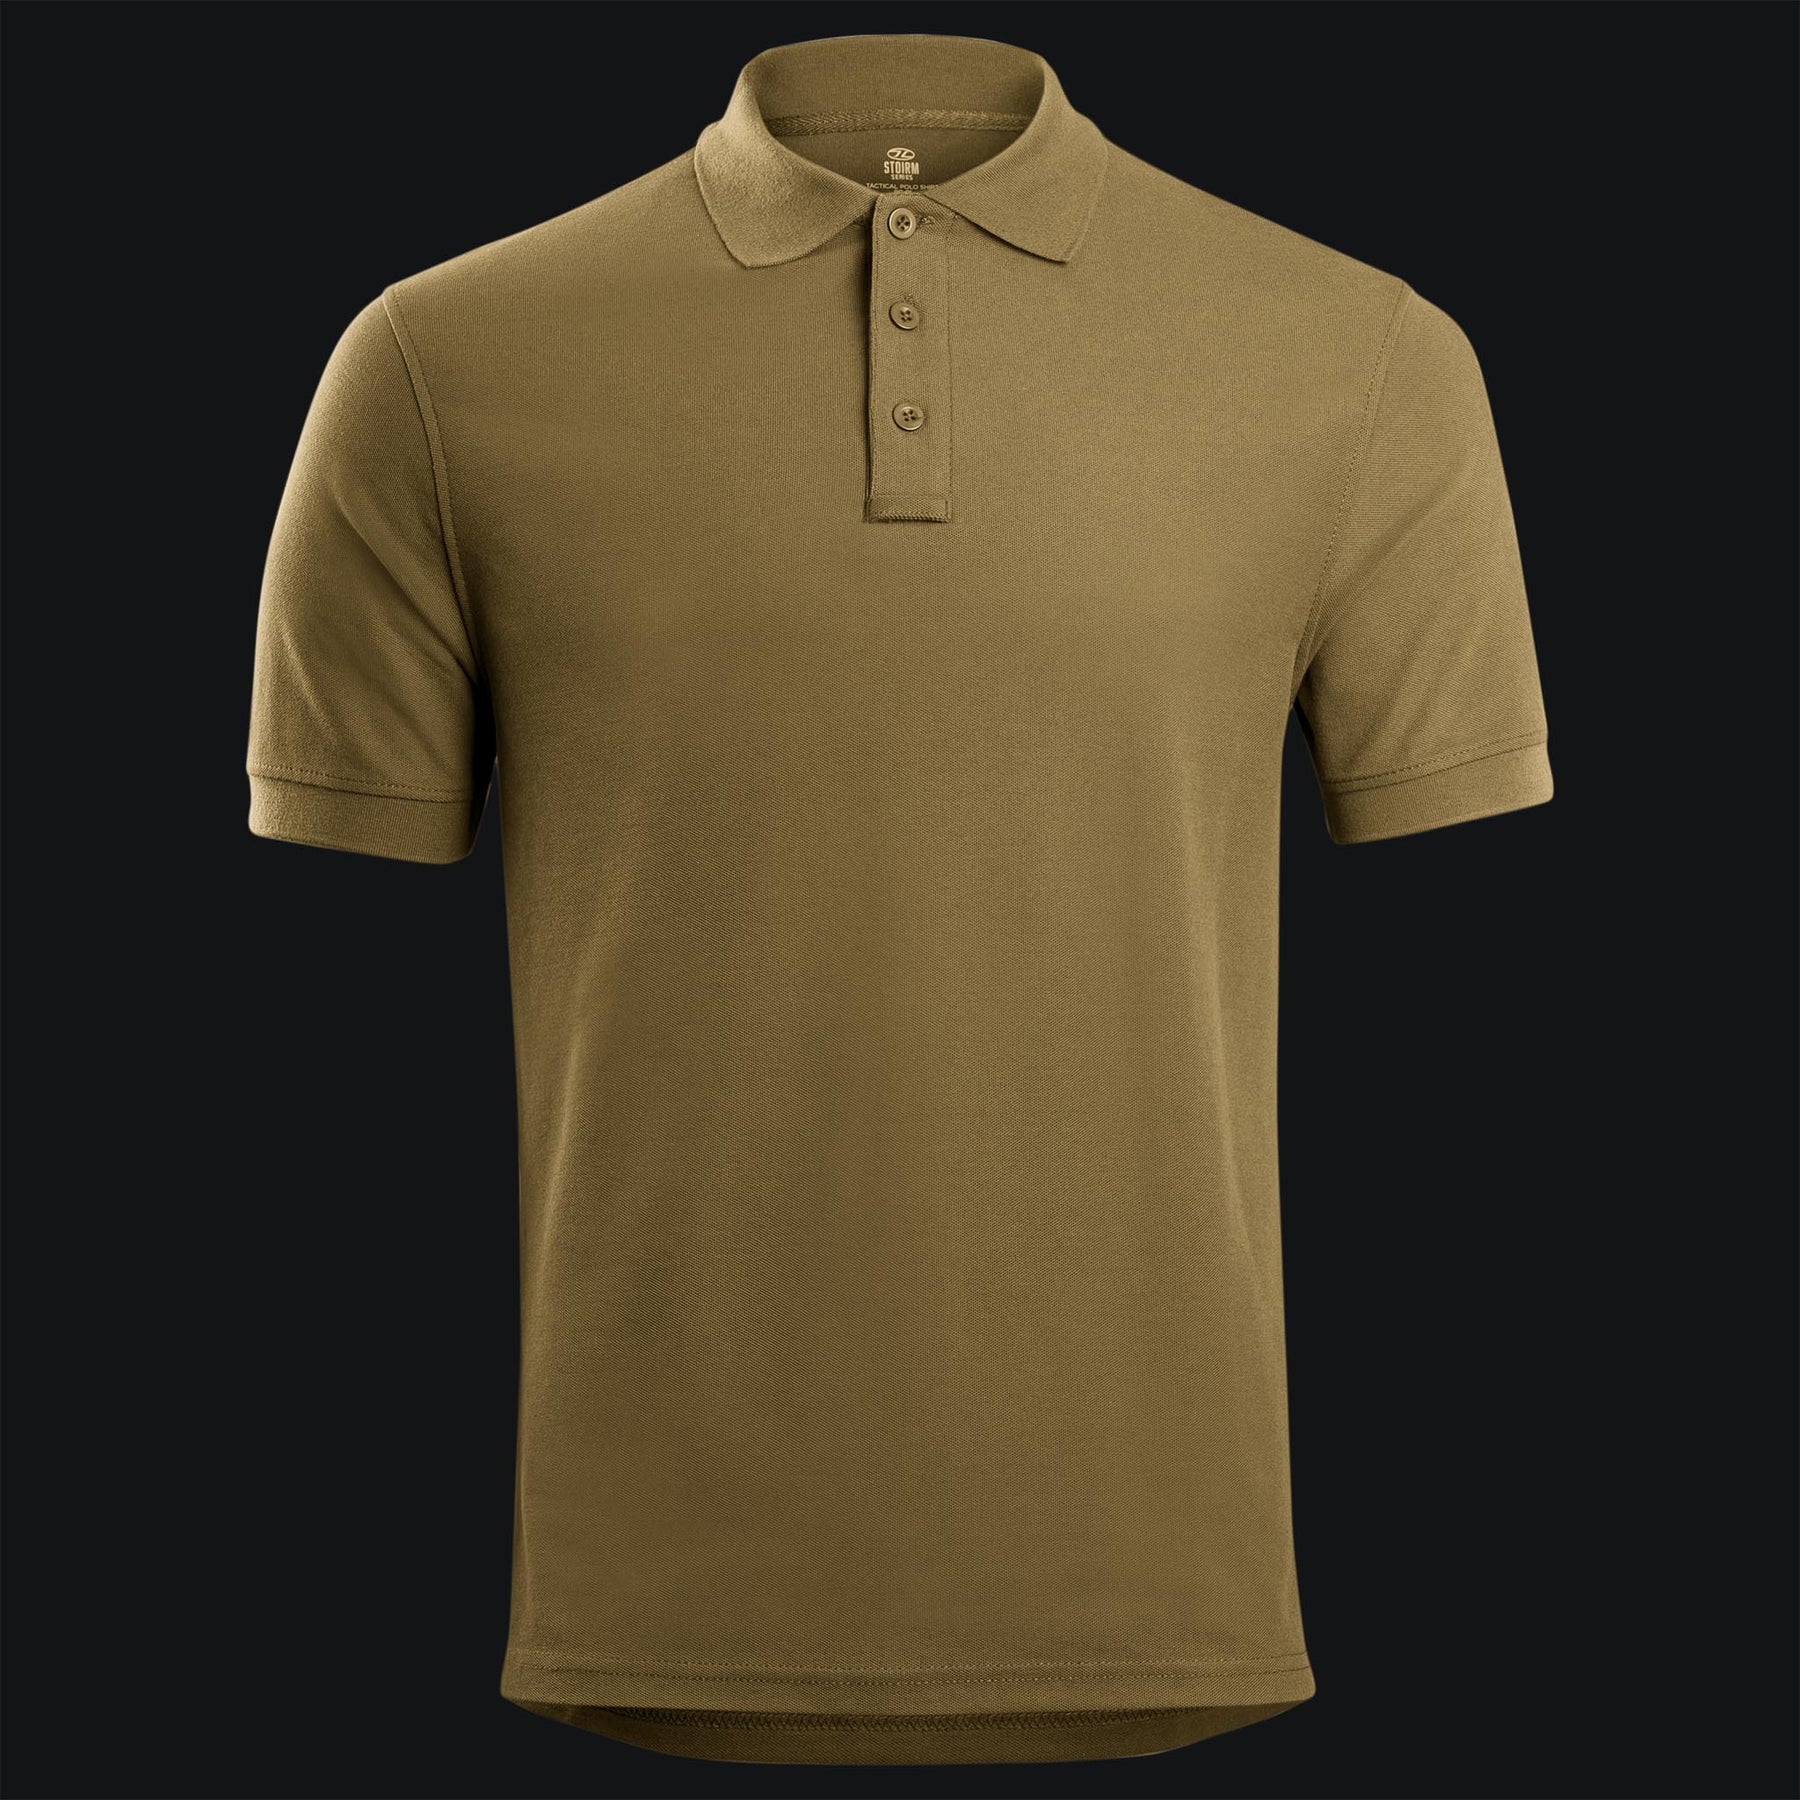 STOIRM Performance Tactical Polo- Coyote Tan